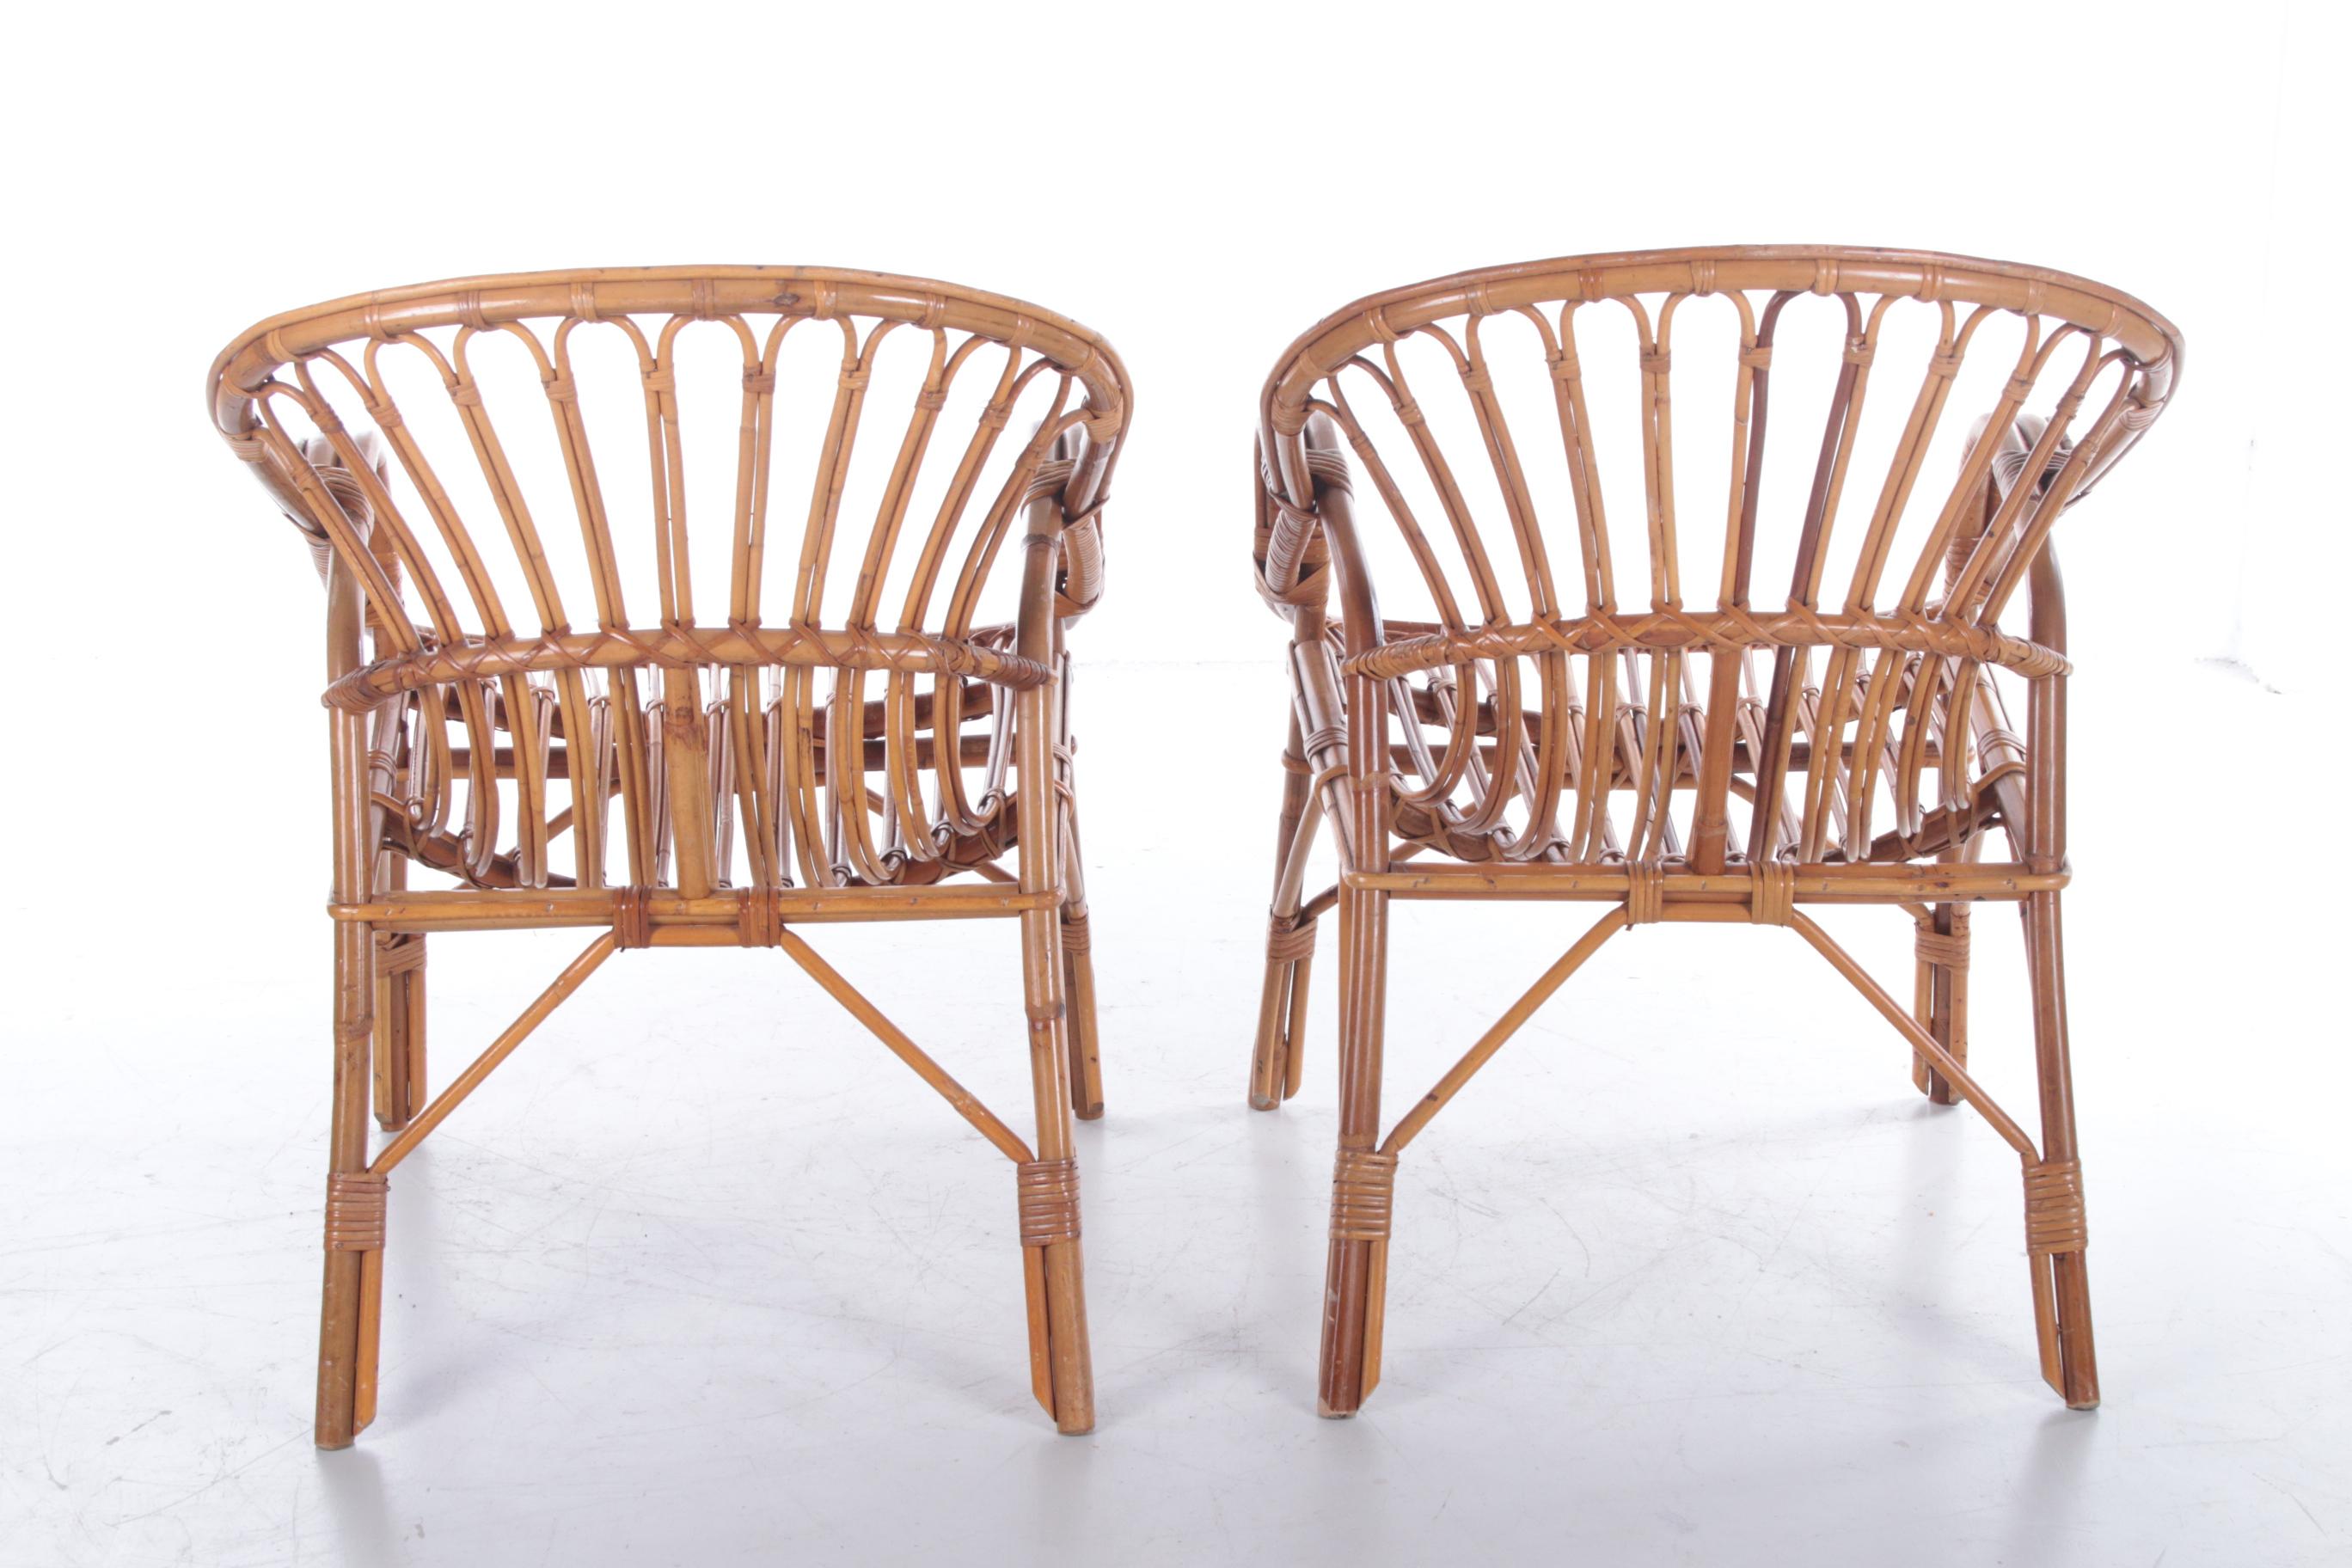 Mid-Century Modern French Retro Vintage Bamboo Set of Armchairs from the 1960s